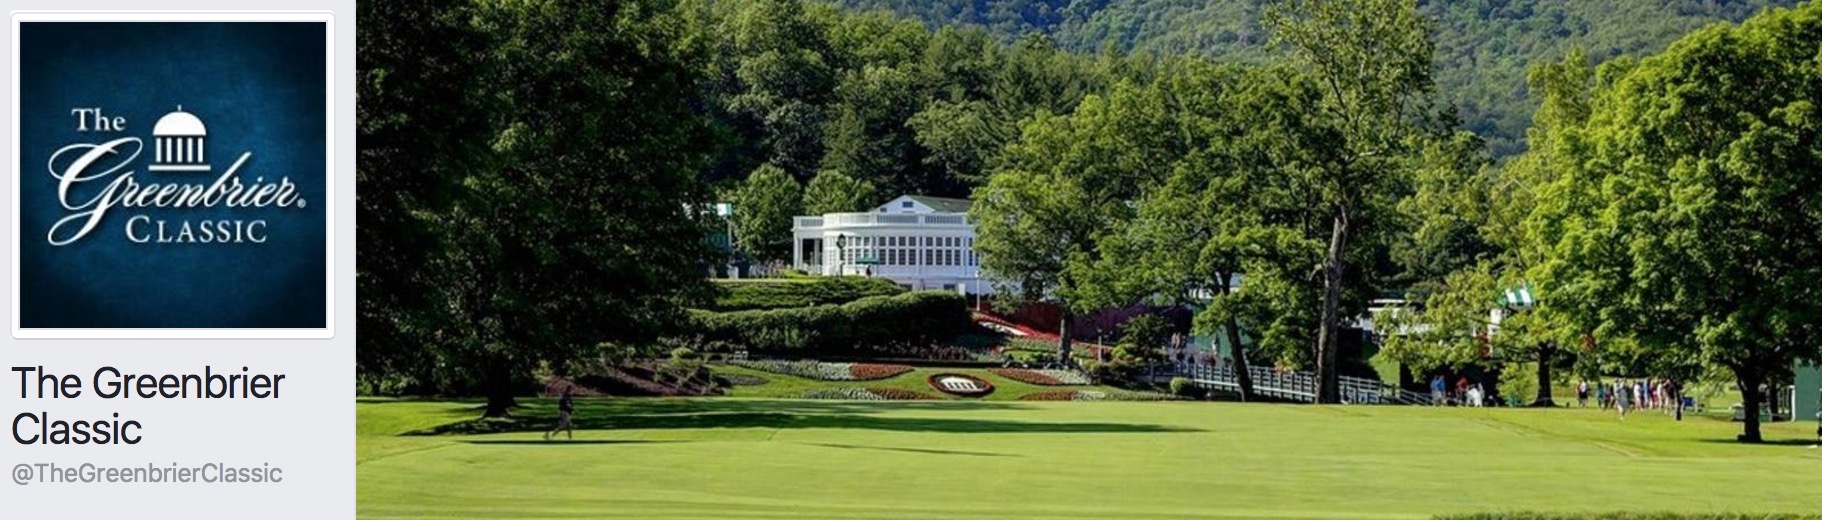 The Greenbrier Classic